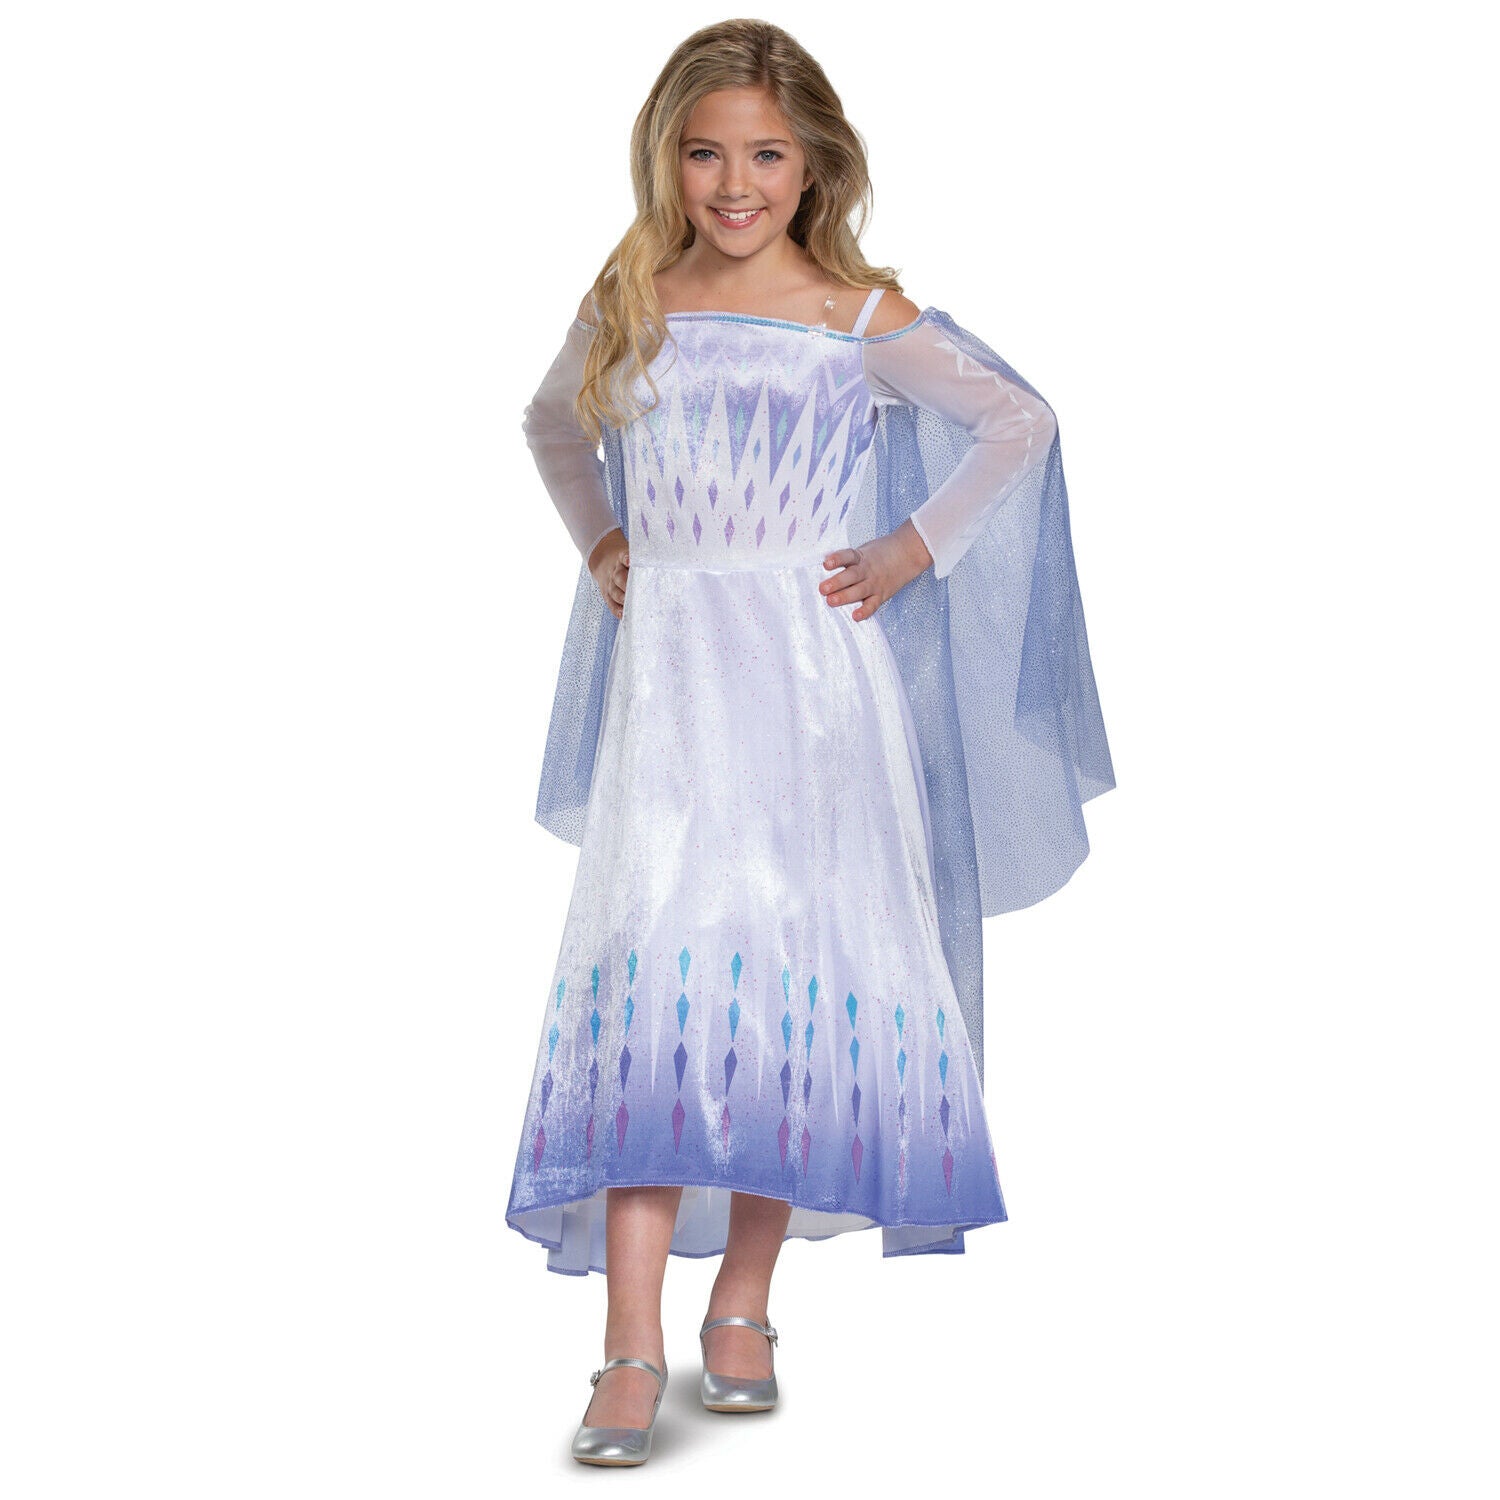 Disguise Costume for Girls Deluxe Dress and Cape Outfit